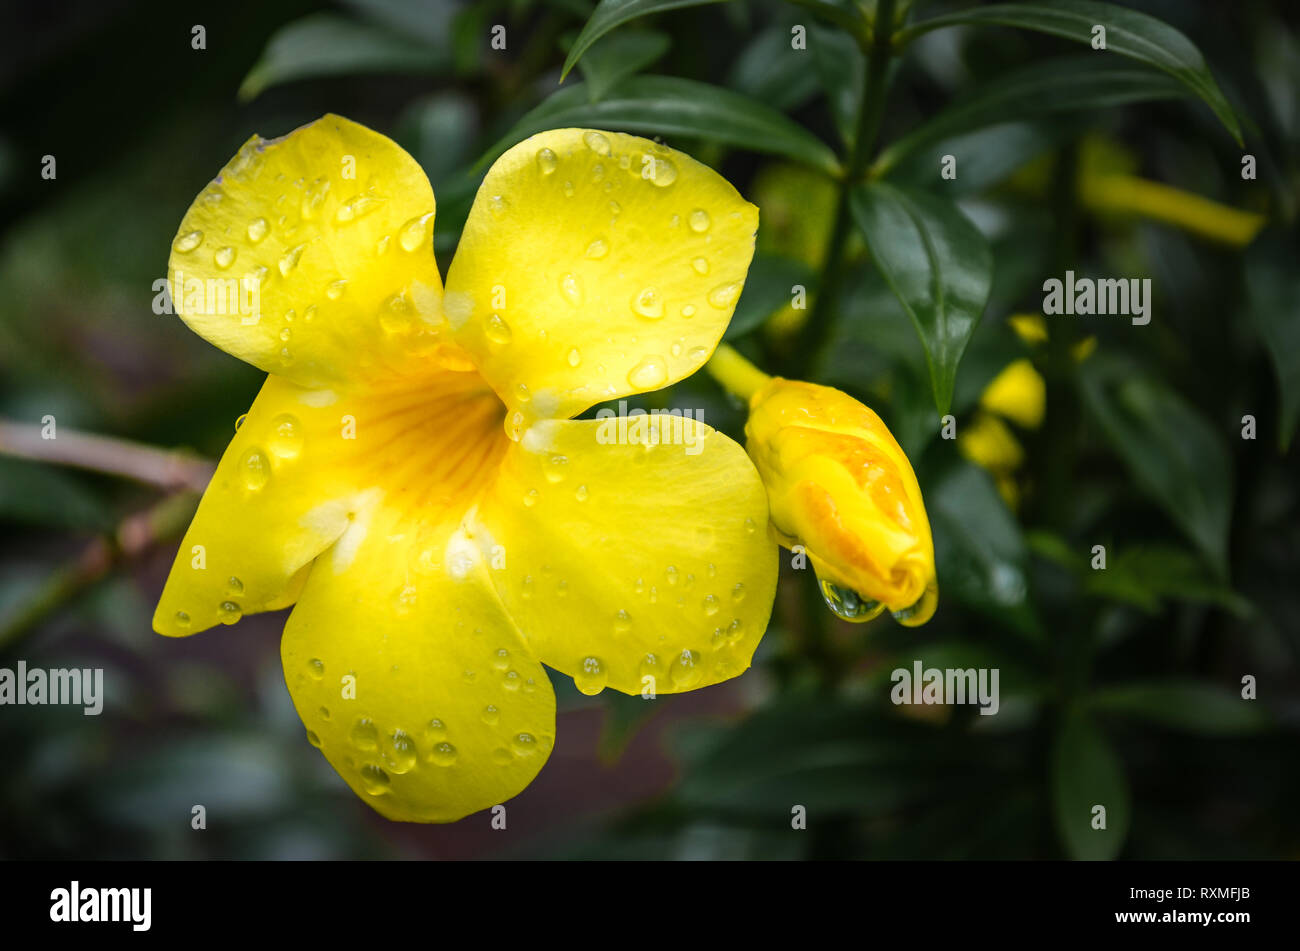 Water drops on yellow flower and bud with green background. Stock Photo